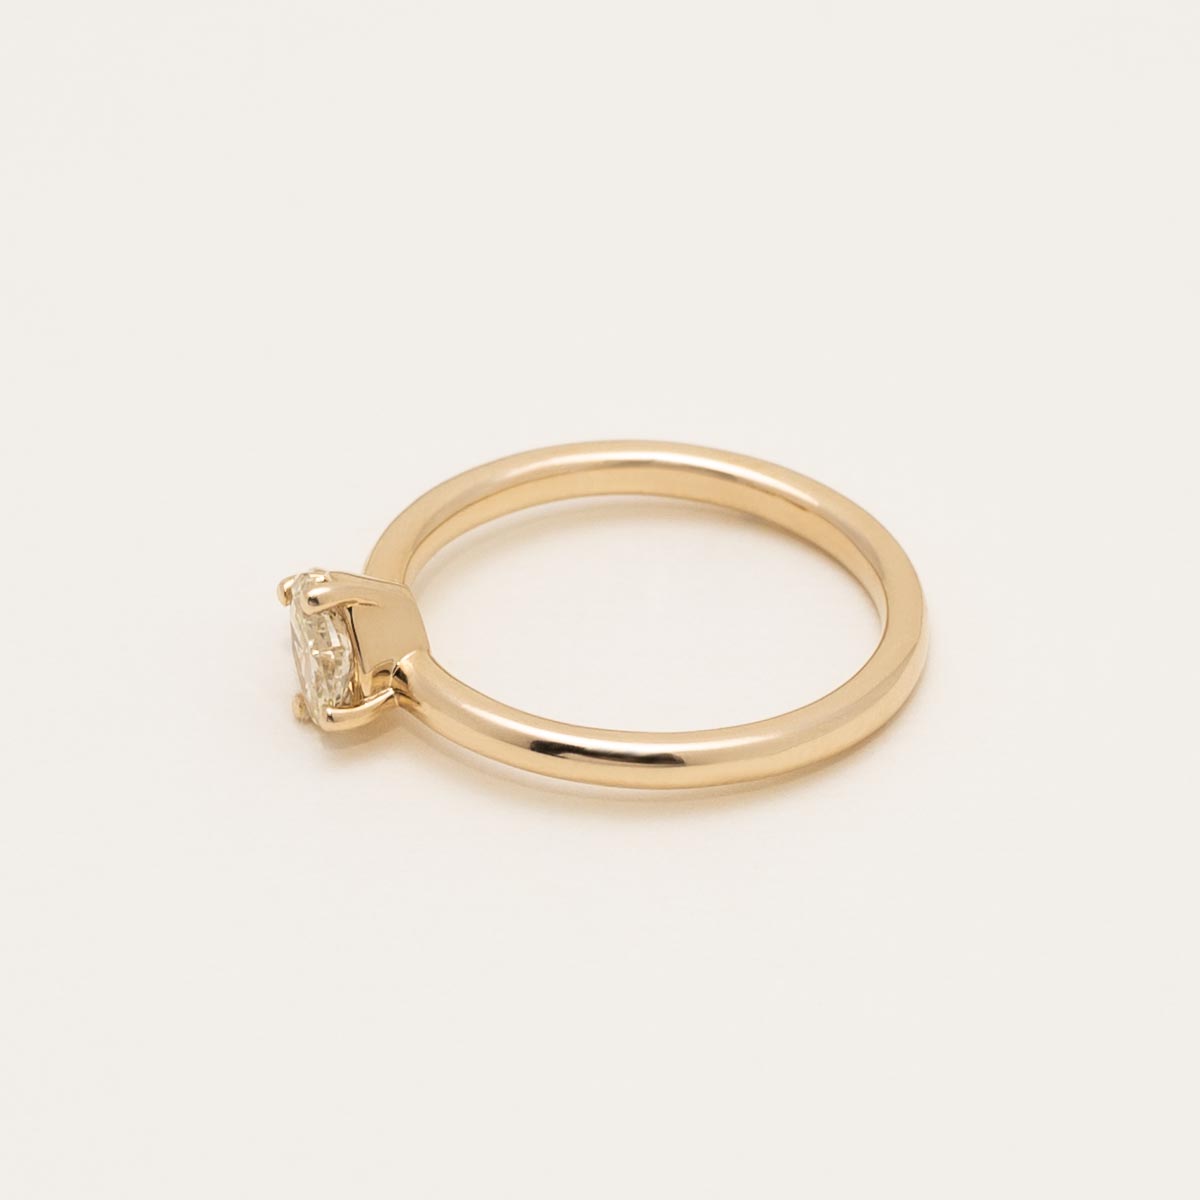 Yellow and White Diamond Ring in 14kt Yellow Gold (1/3ct tw)